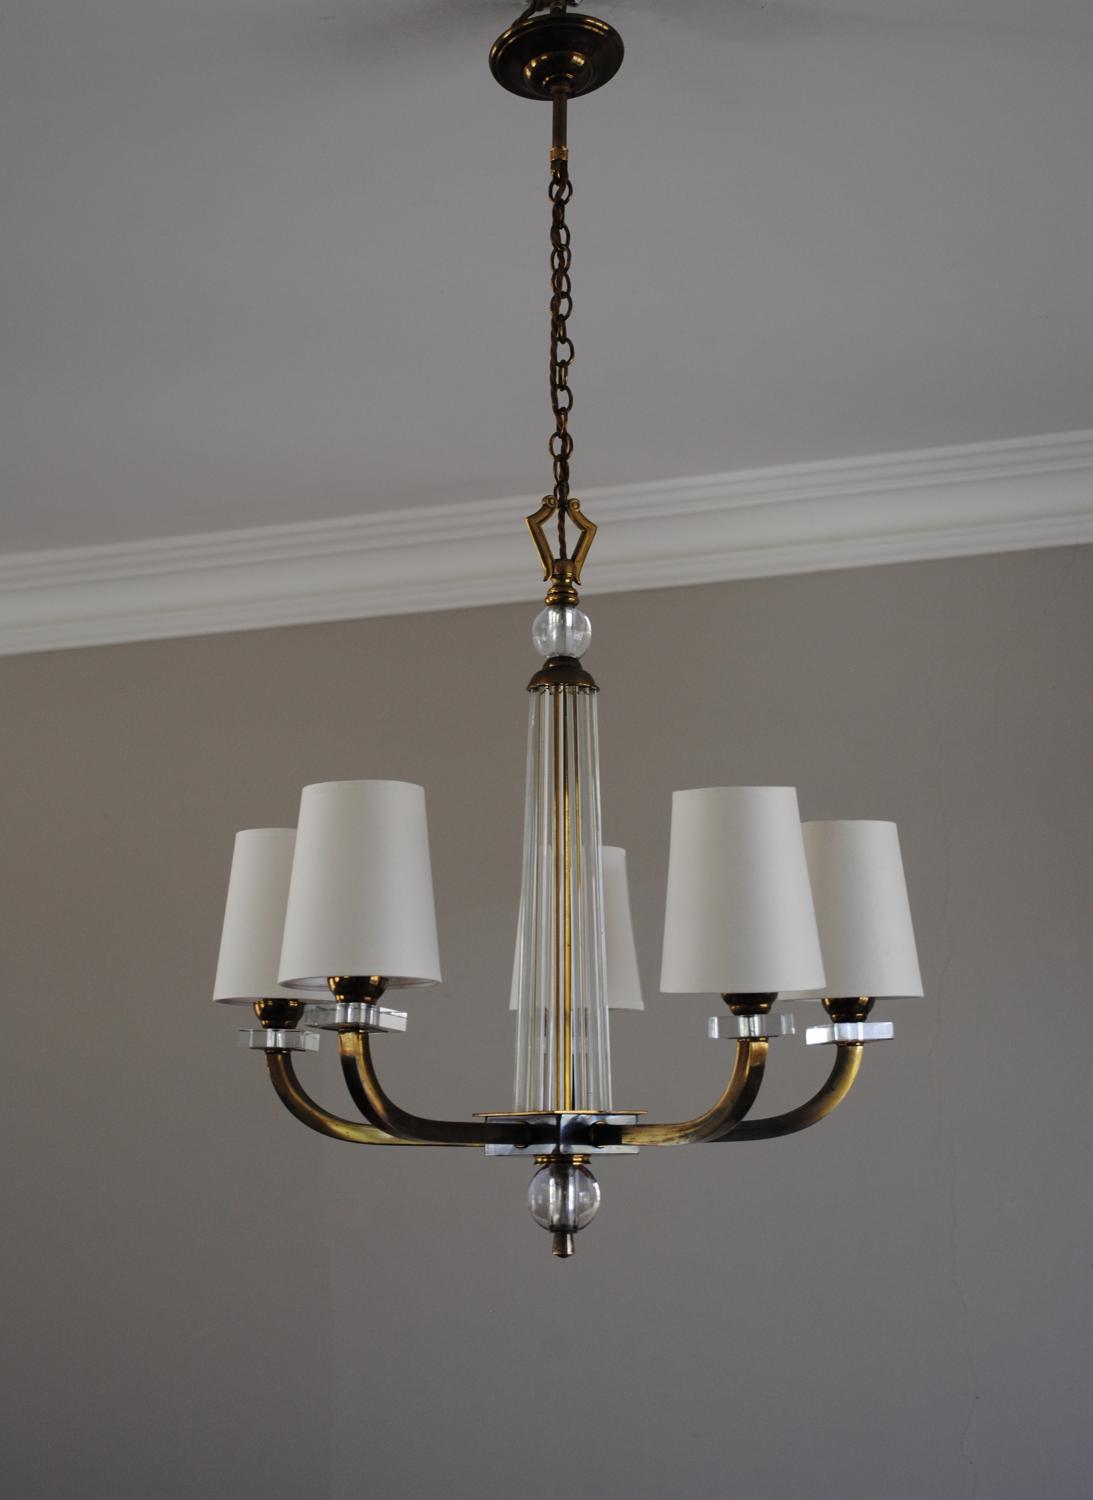 French Art Deco chandelier with 5 arms